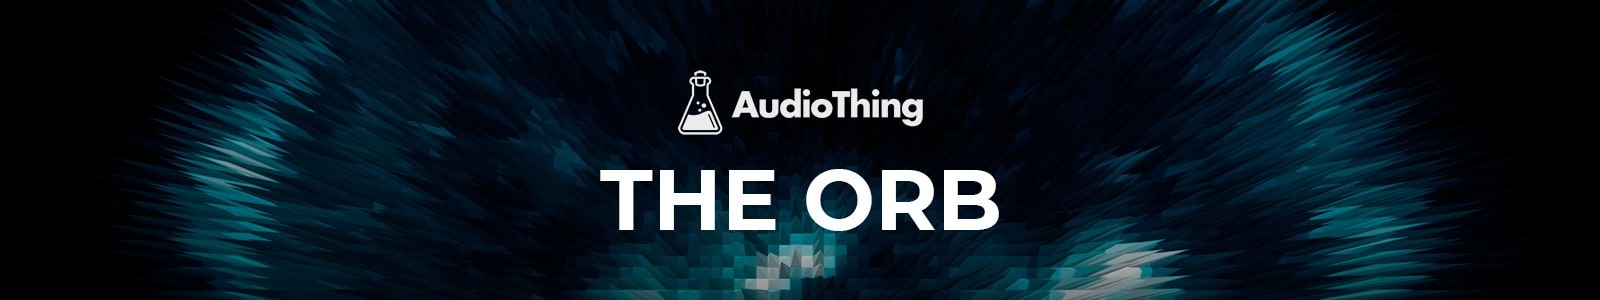 AudioThing The Orb